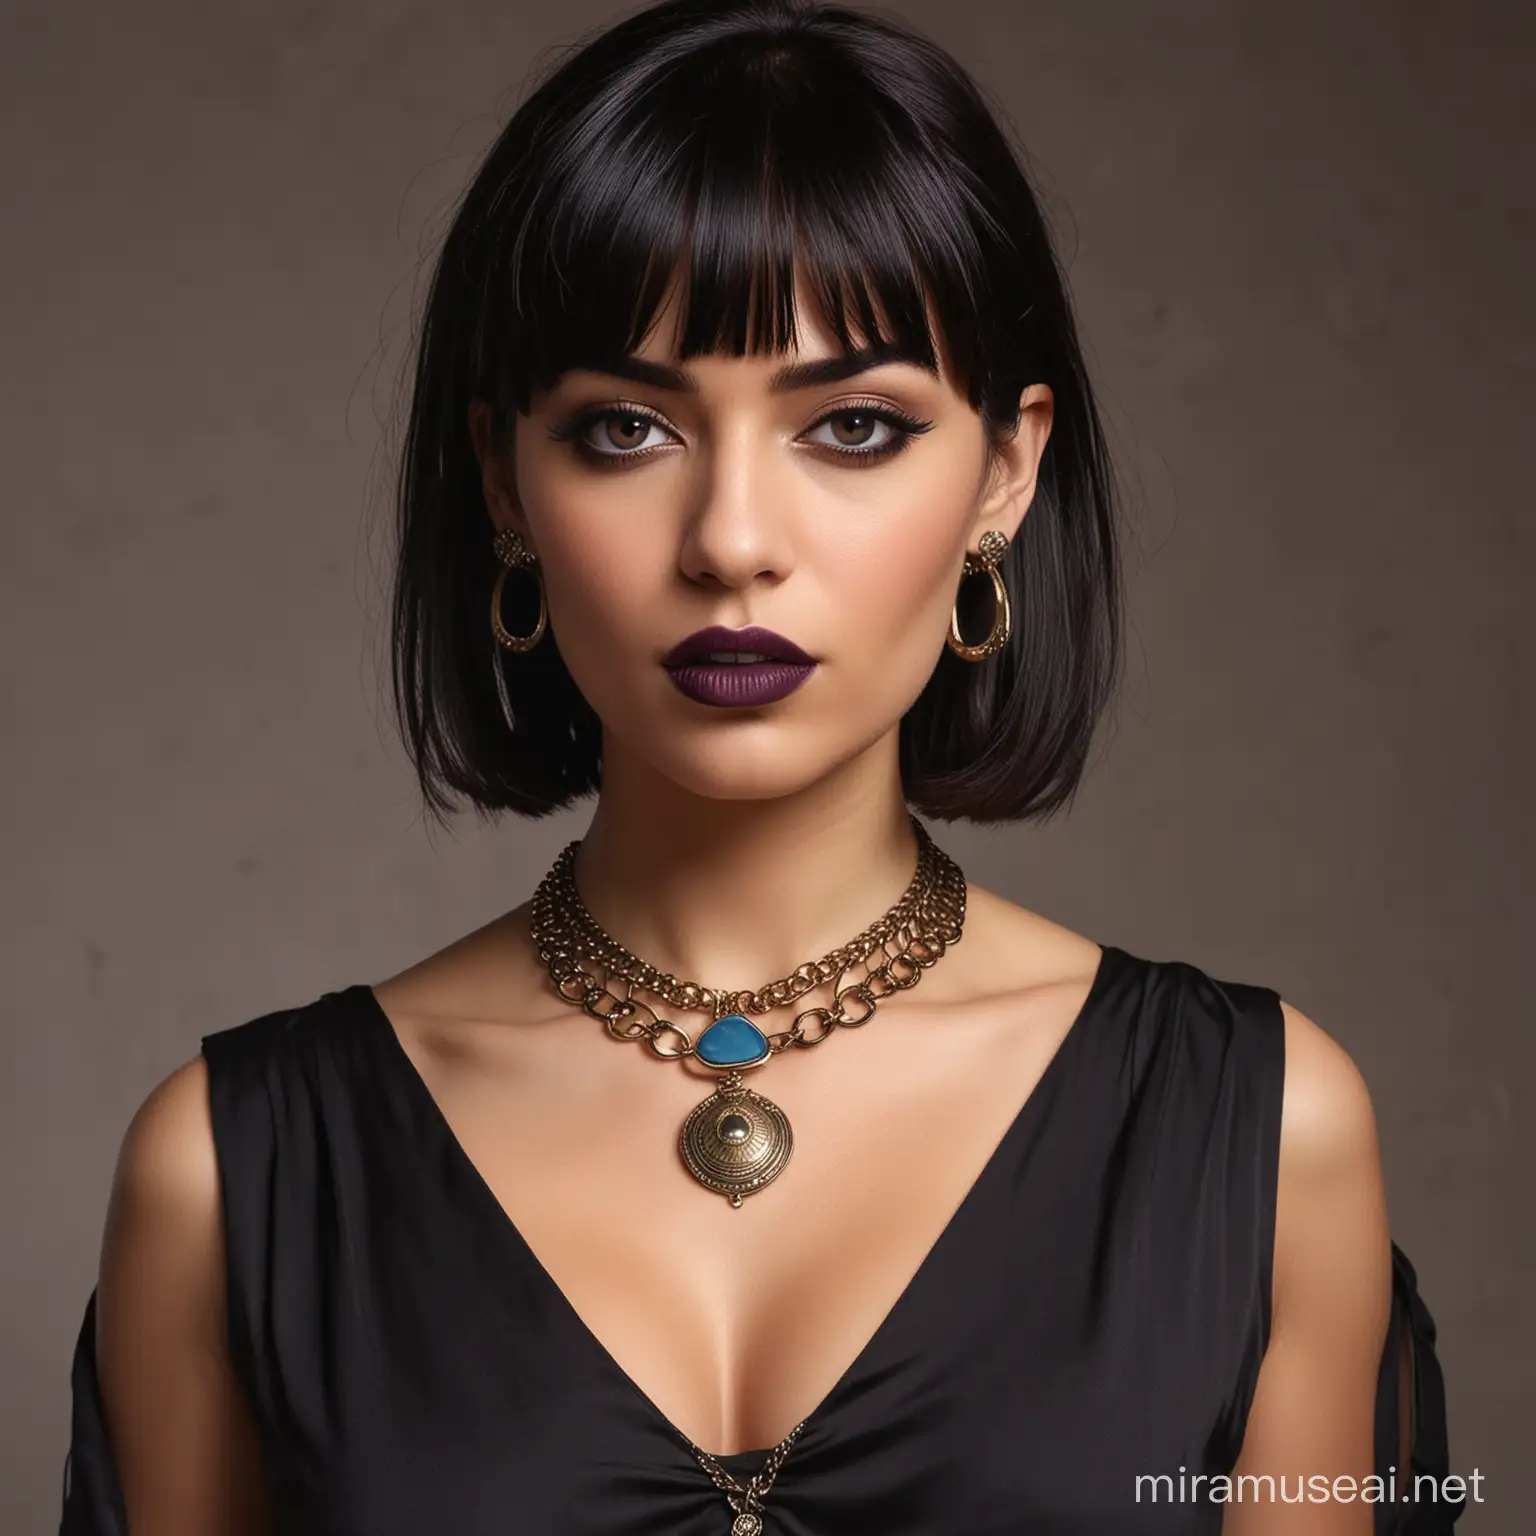 French Female Detective with Egyptian Features and Dark Bob Hair